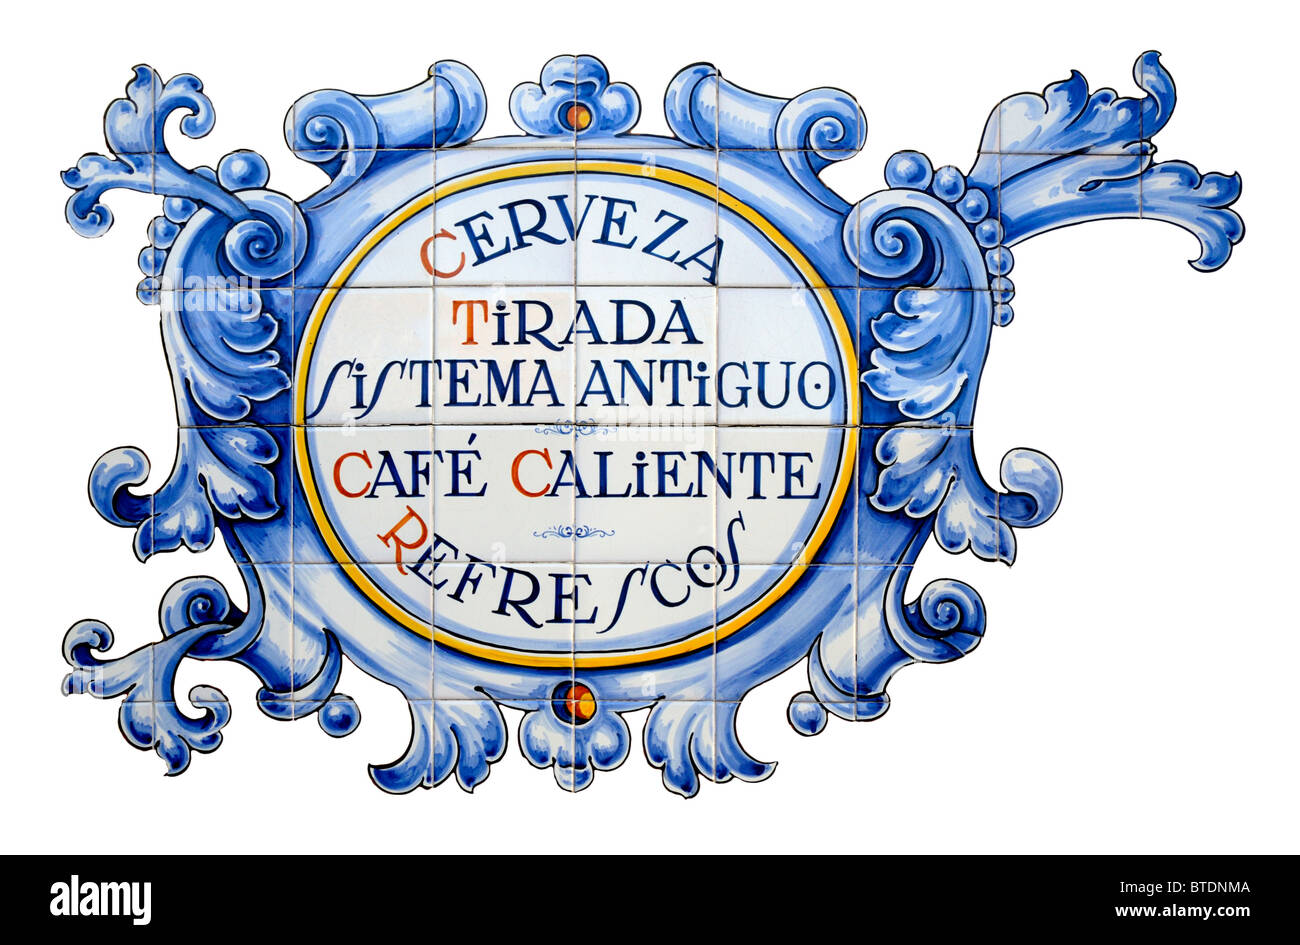 Madrid, Spain. Painted tiled cafe sign advertising beer on draught, hot coffee, refreshments Stock Photo